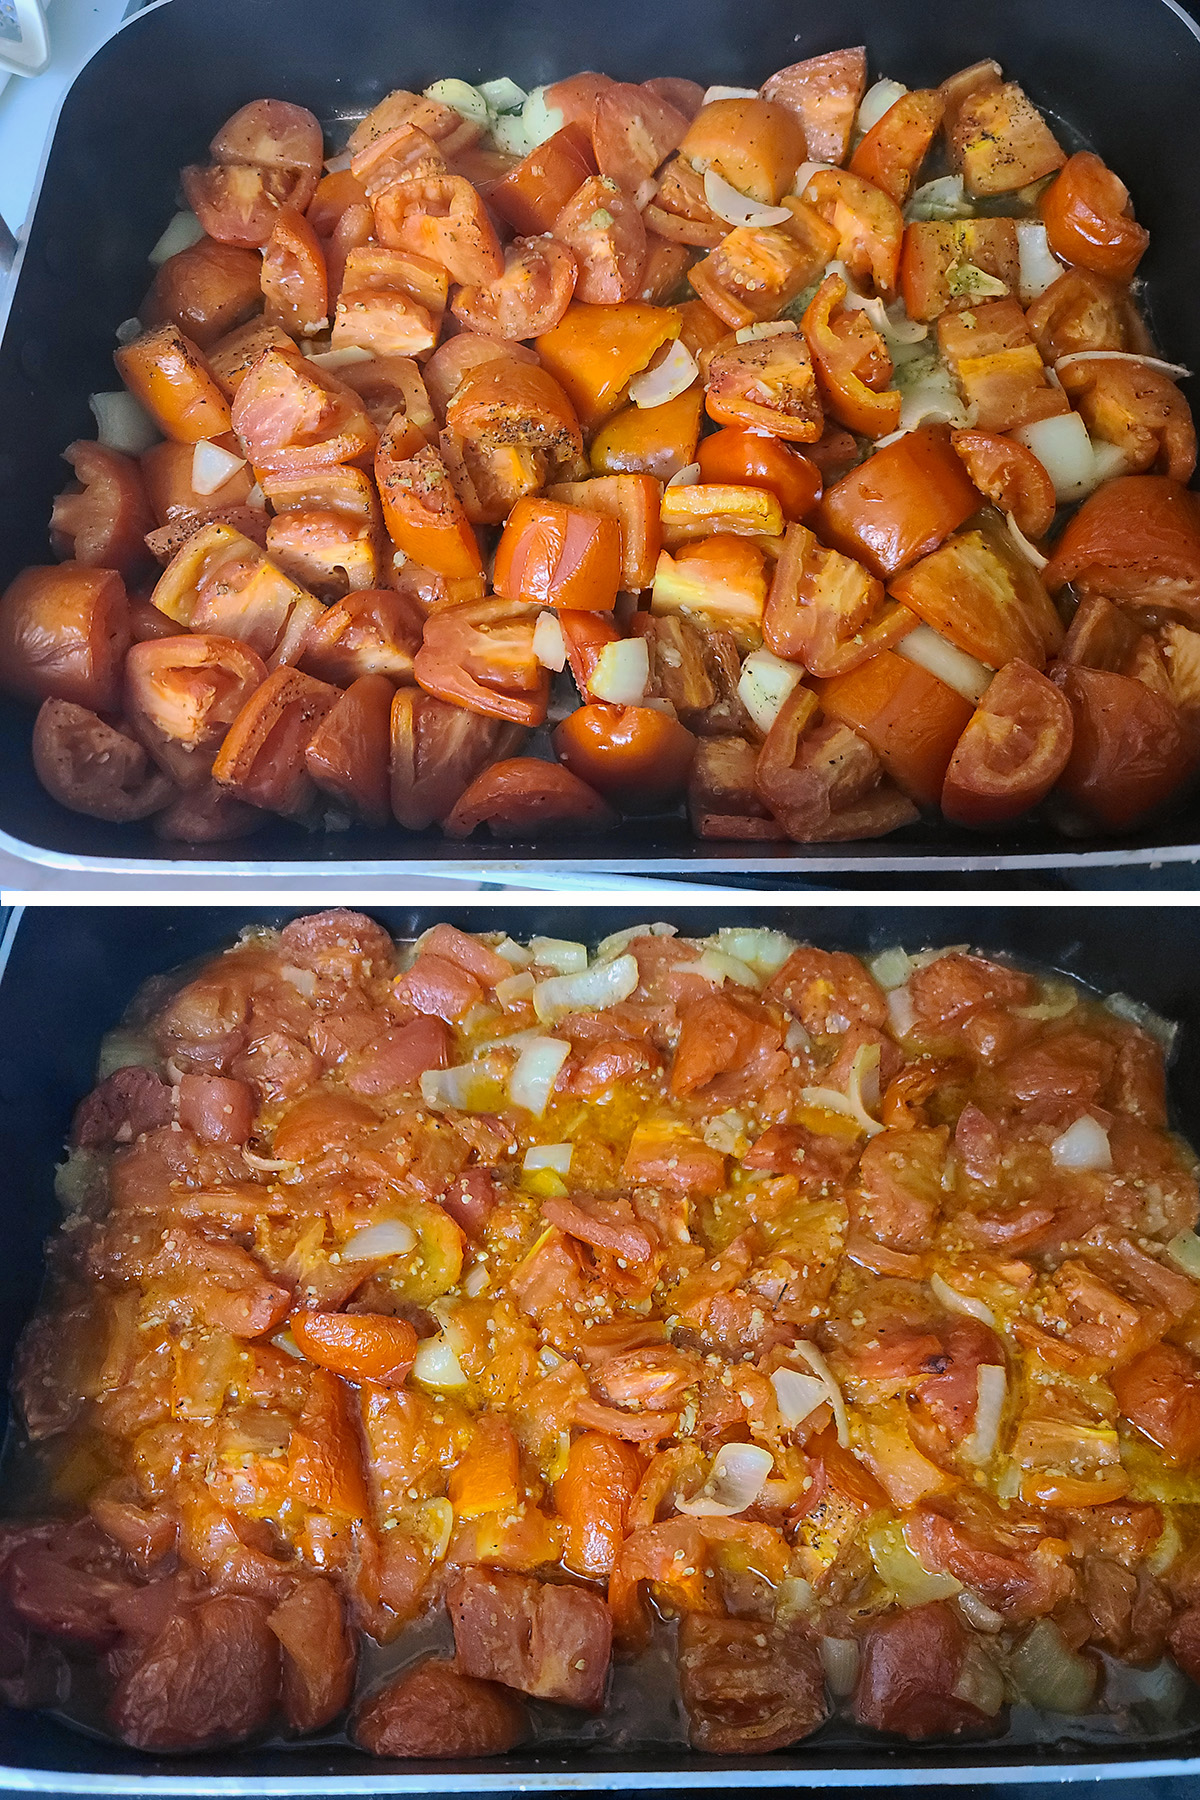 A two part image of tomatoes and onions in a roasted pan, partially cooked, and fully broken down.